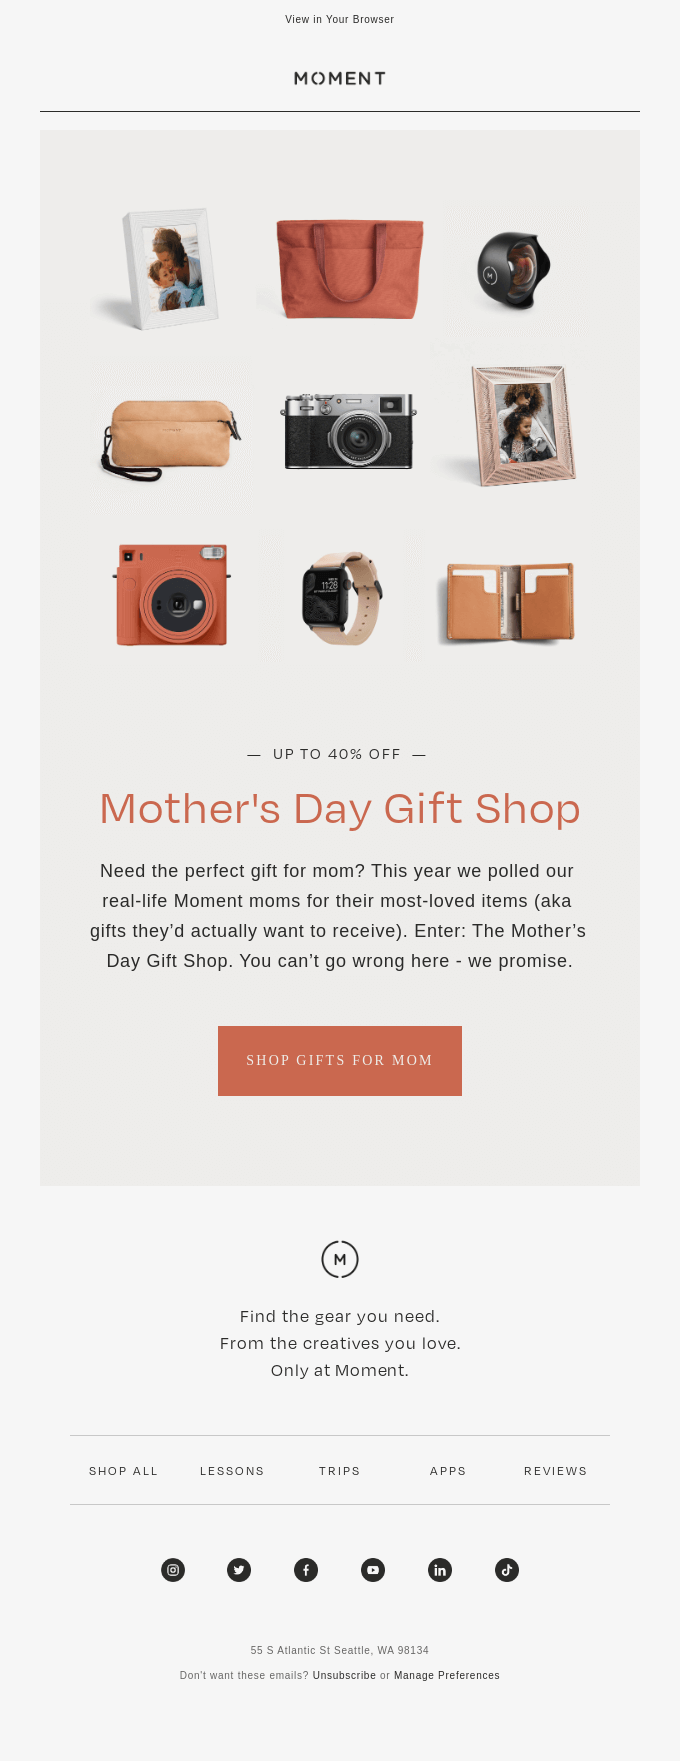 Our Favorite Mother's Day Gifts